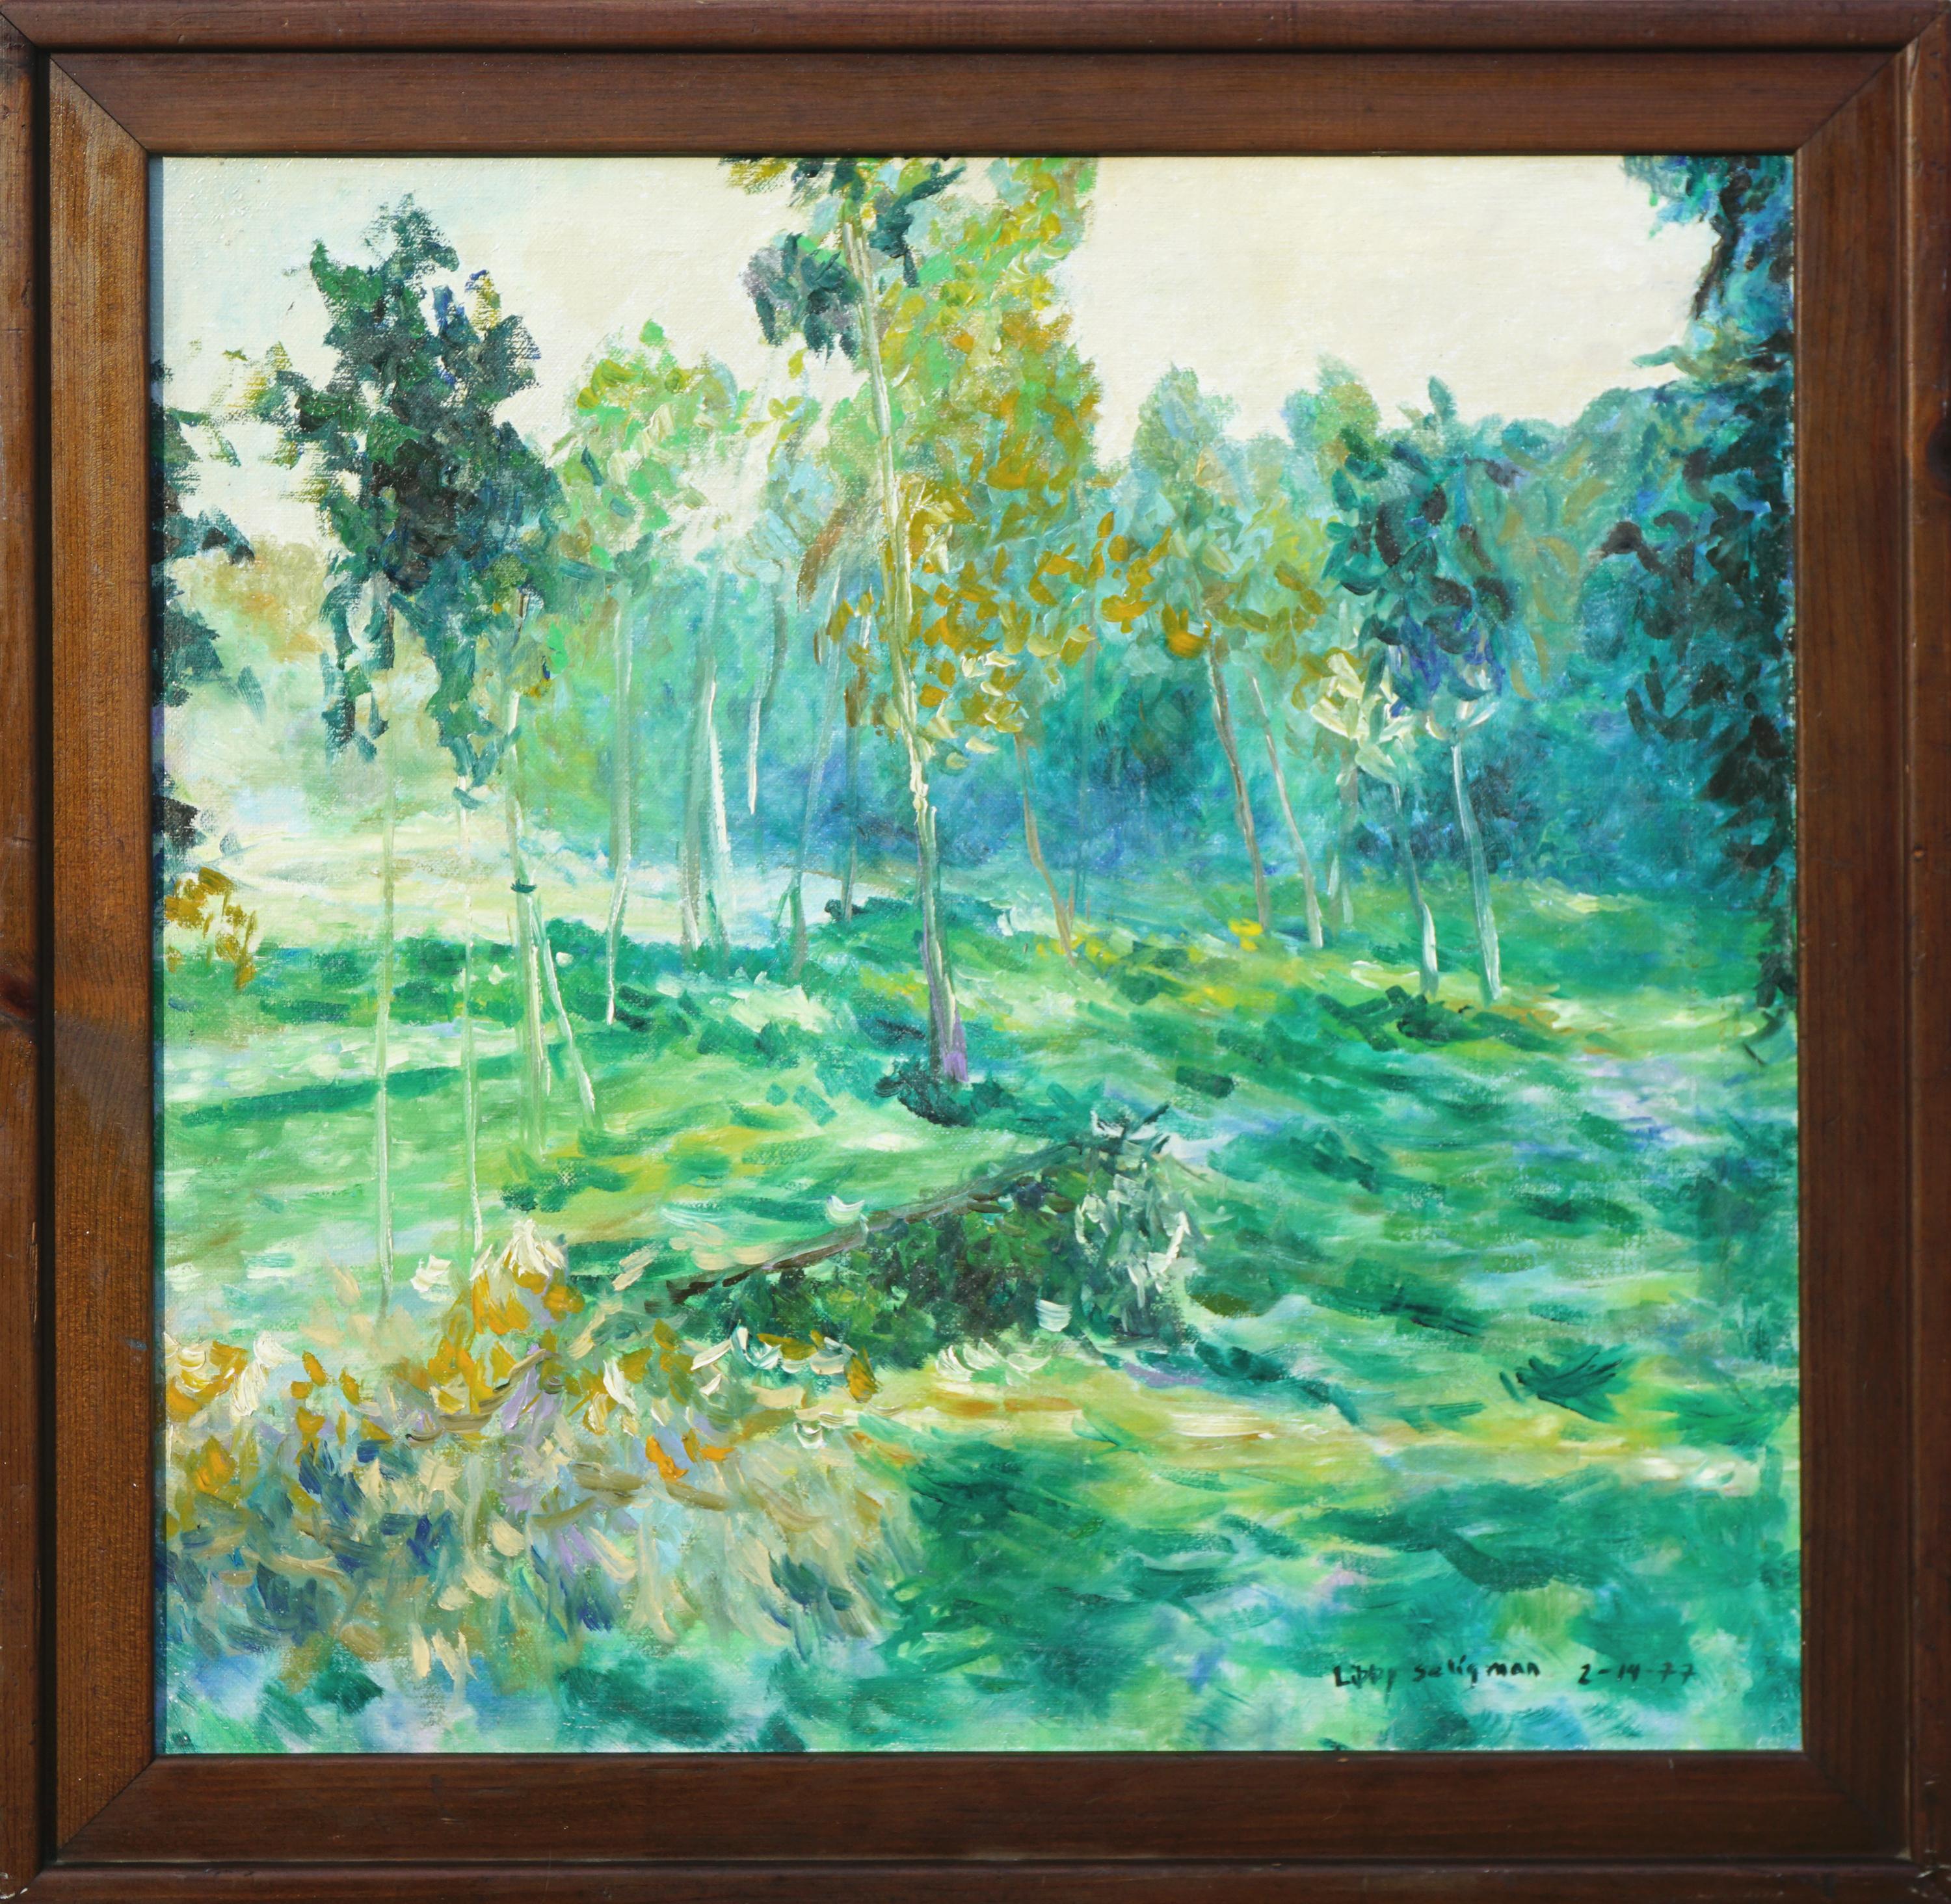 Libby Beth Seligman Landscape Painting - Vintage Abstracted Fauvist Birch Tree Landscape